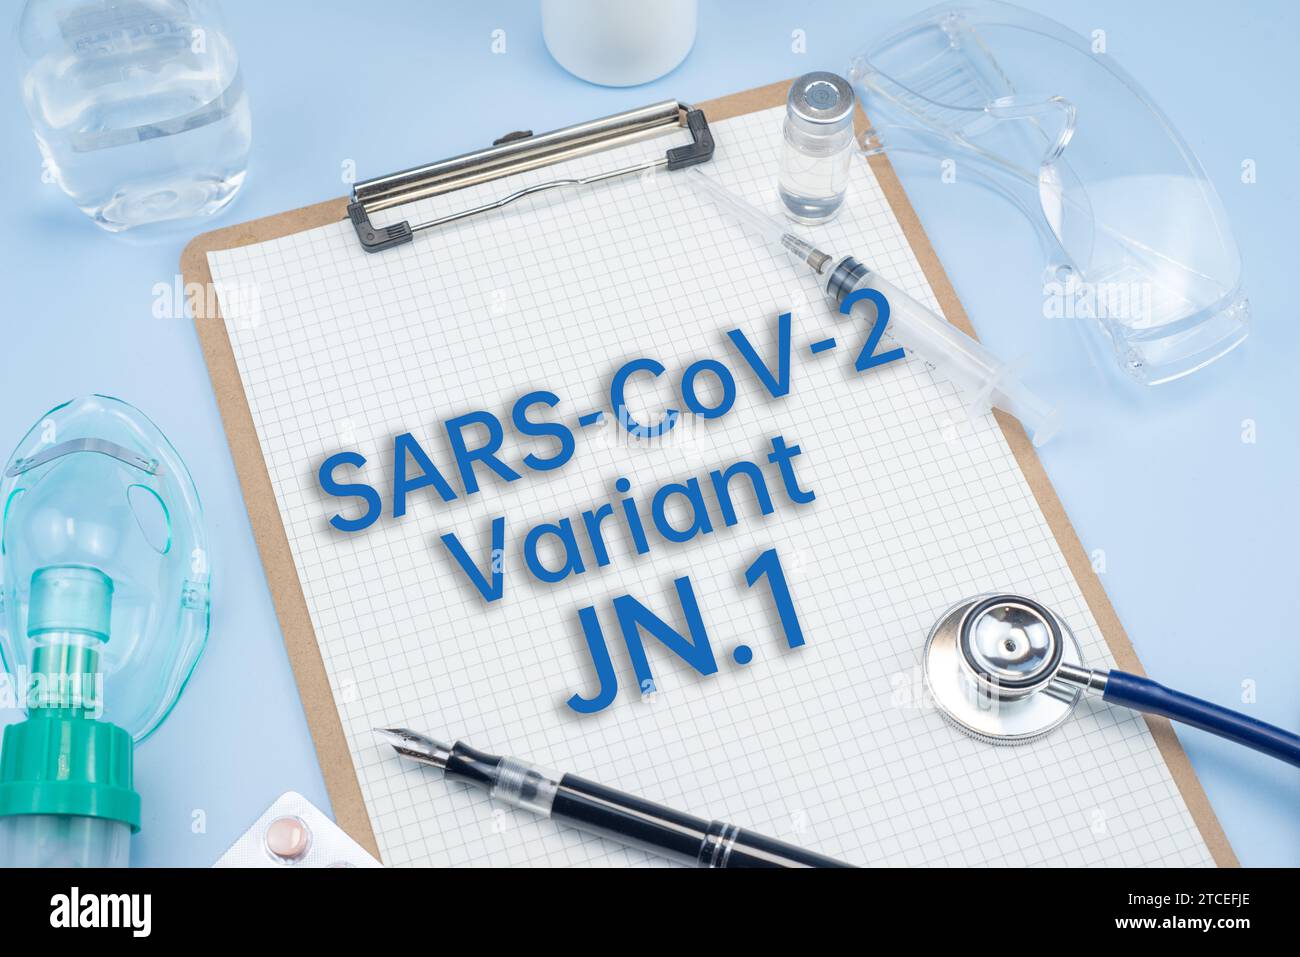 Background of SARS-CoV-2 Variant JN.1,Medical health concept Stock Photo